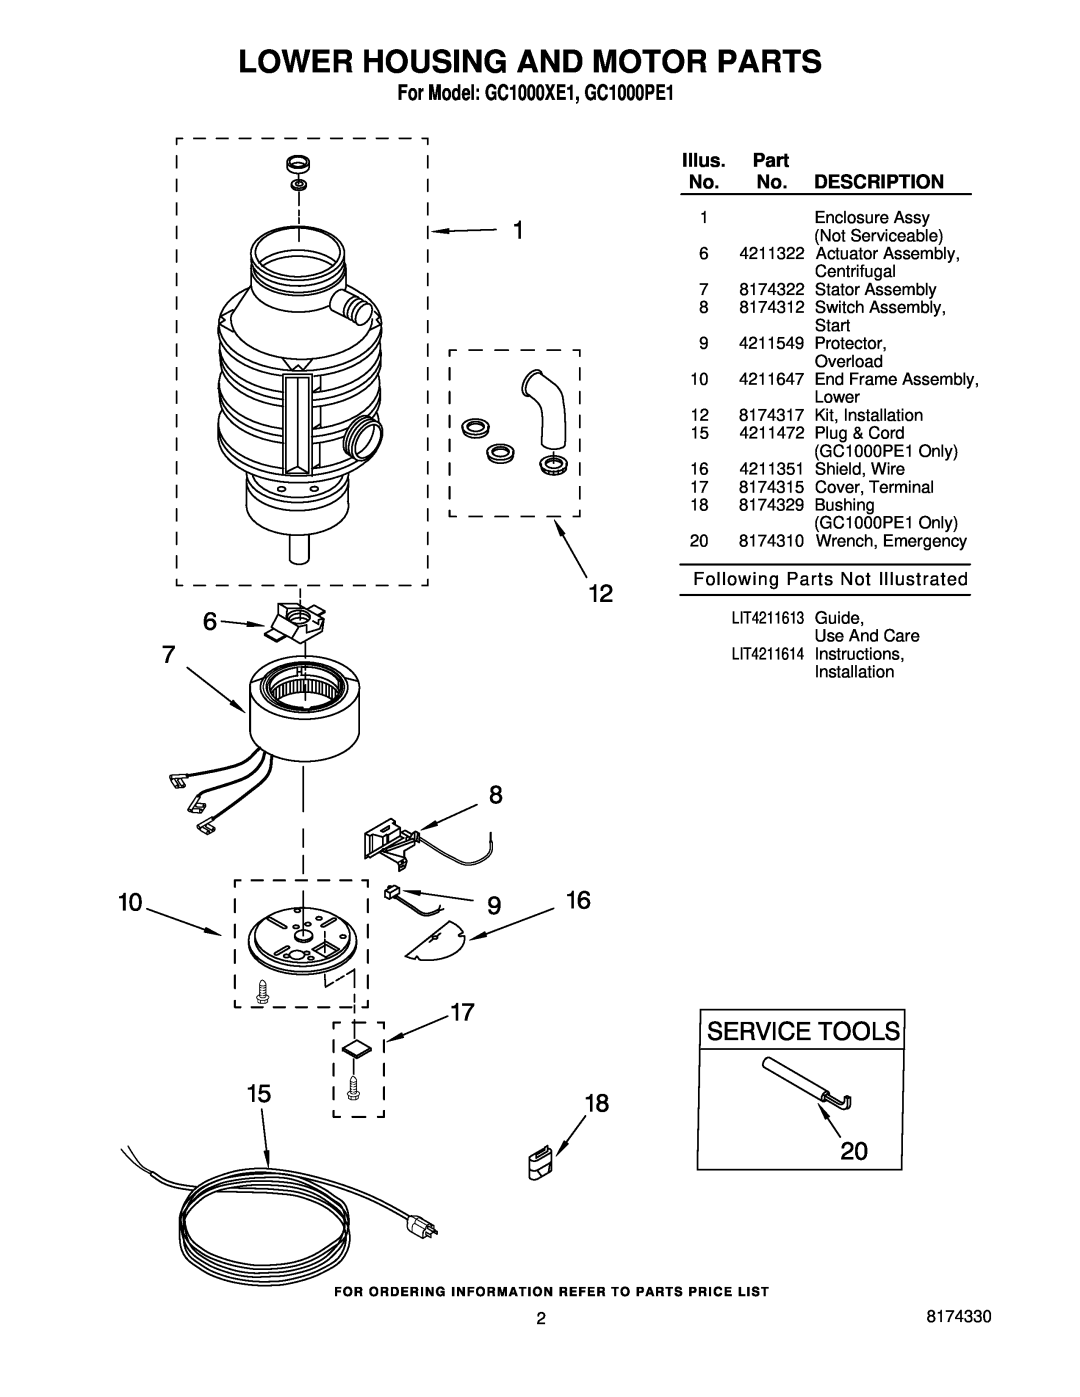 Whirlpool manual Lower Housing And Motor Parts, Illus, Description, For Model GC1000XE1, GC1000PE1 